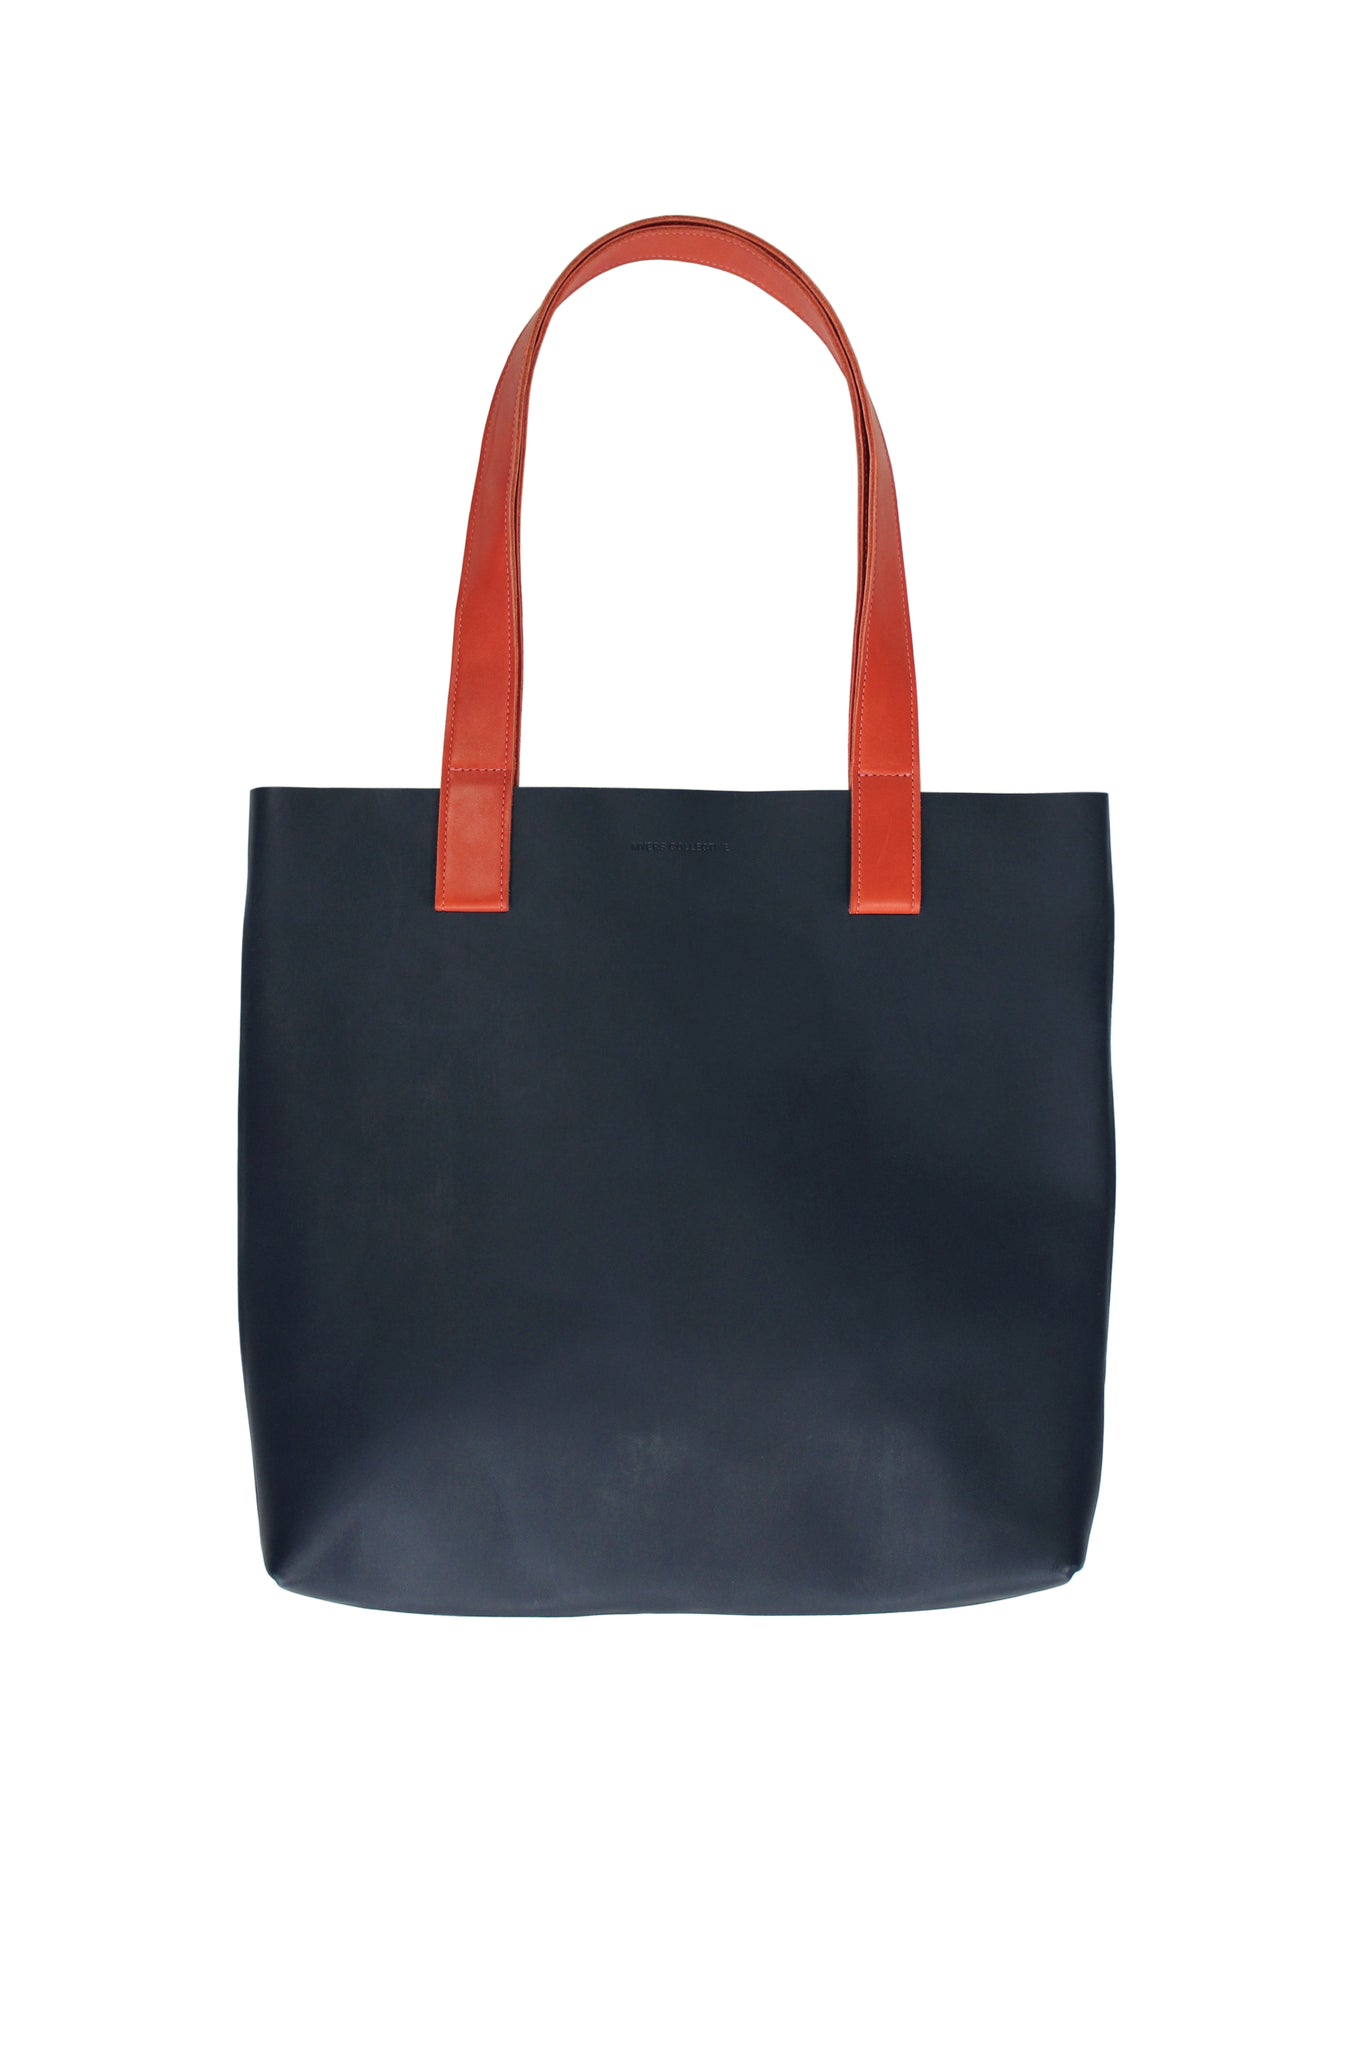 Myers Collective Square Tote Navy body / Brick strap